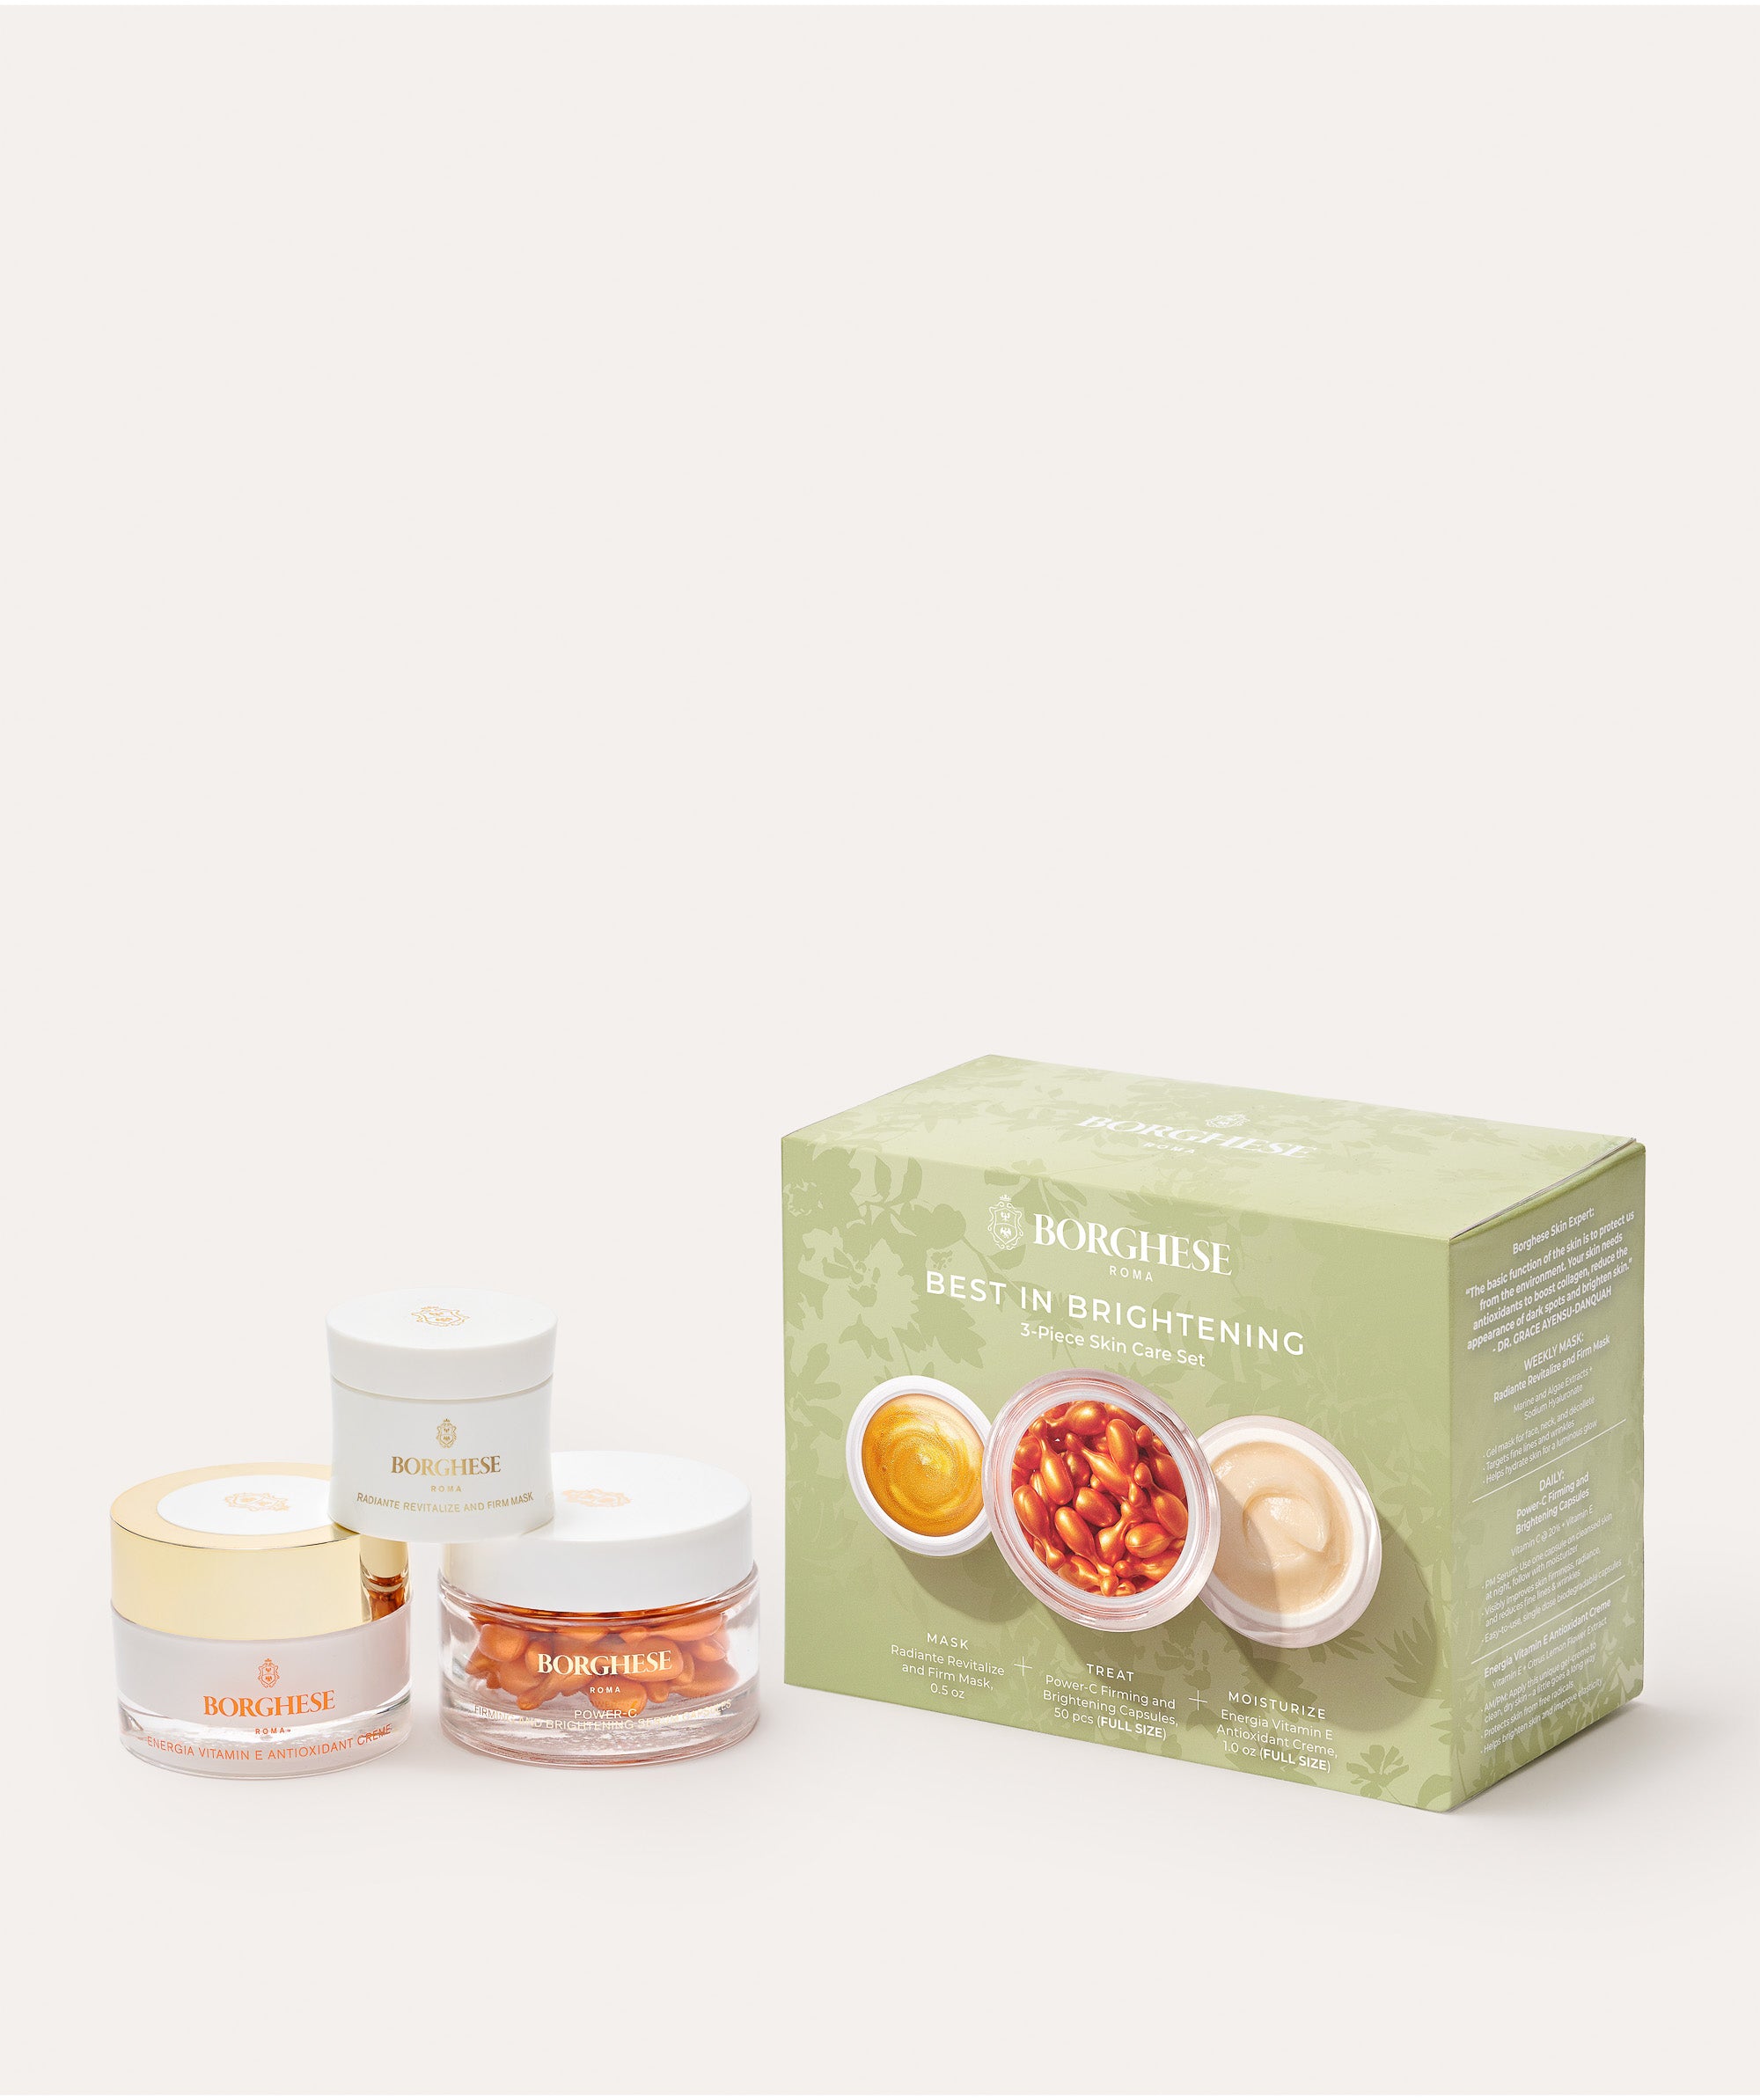 The Borghese Roma 3-Piece Best in Brightening Gift Set contents and gift box